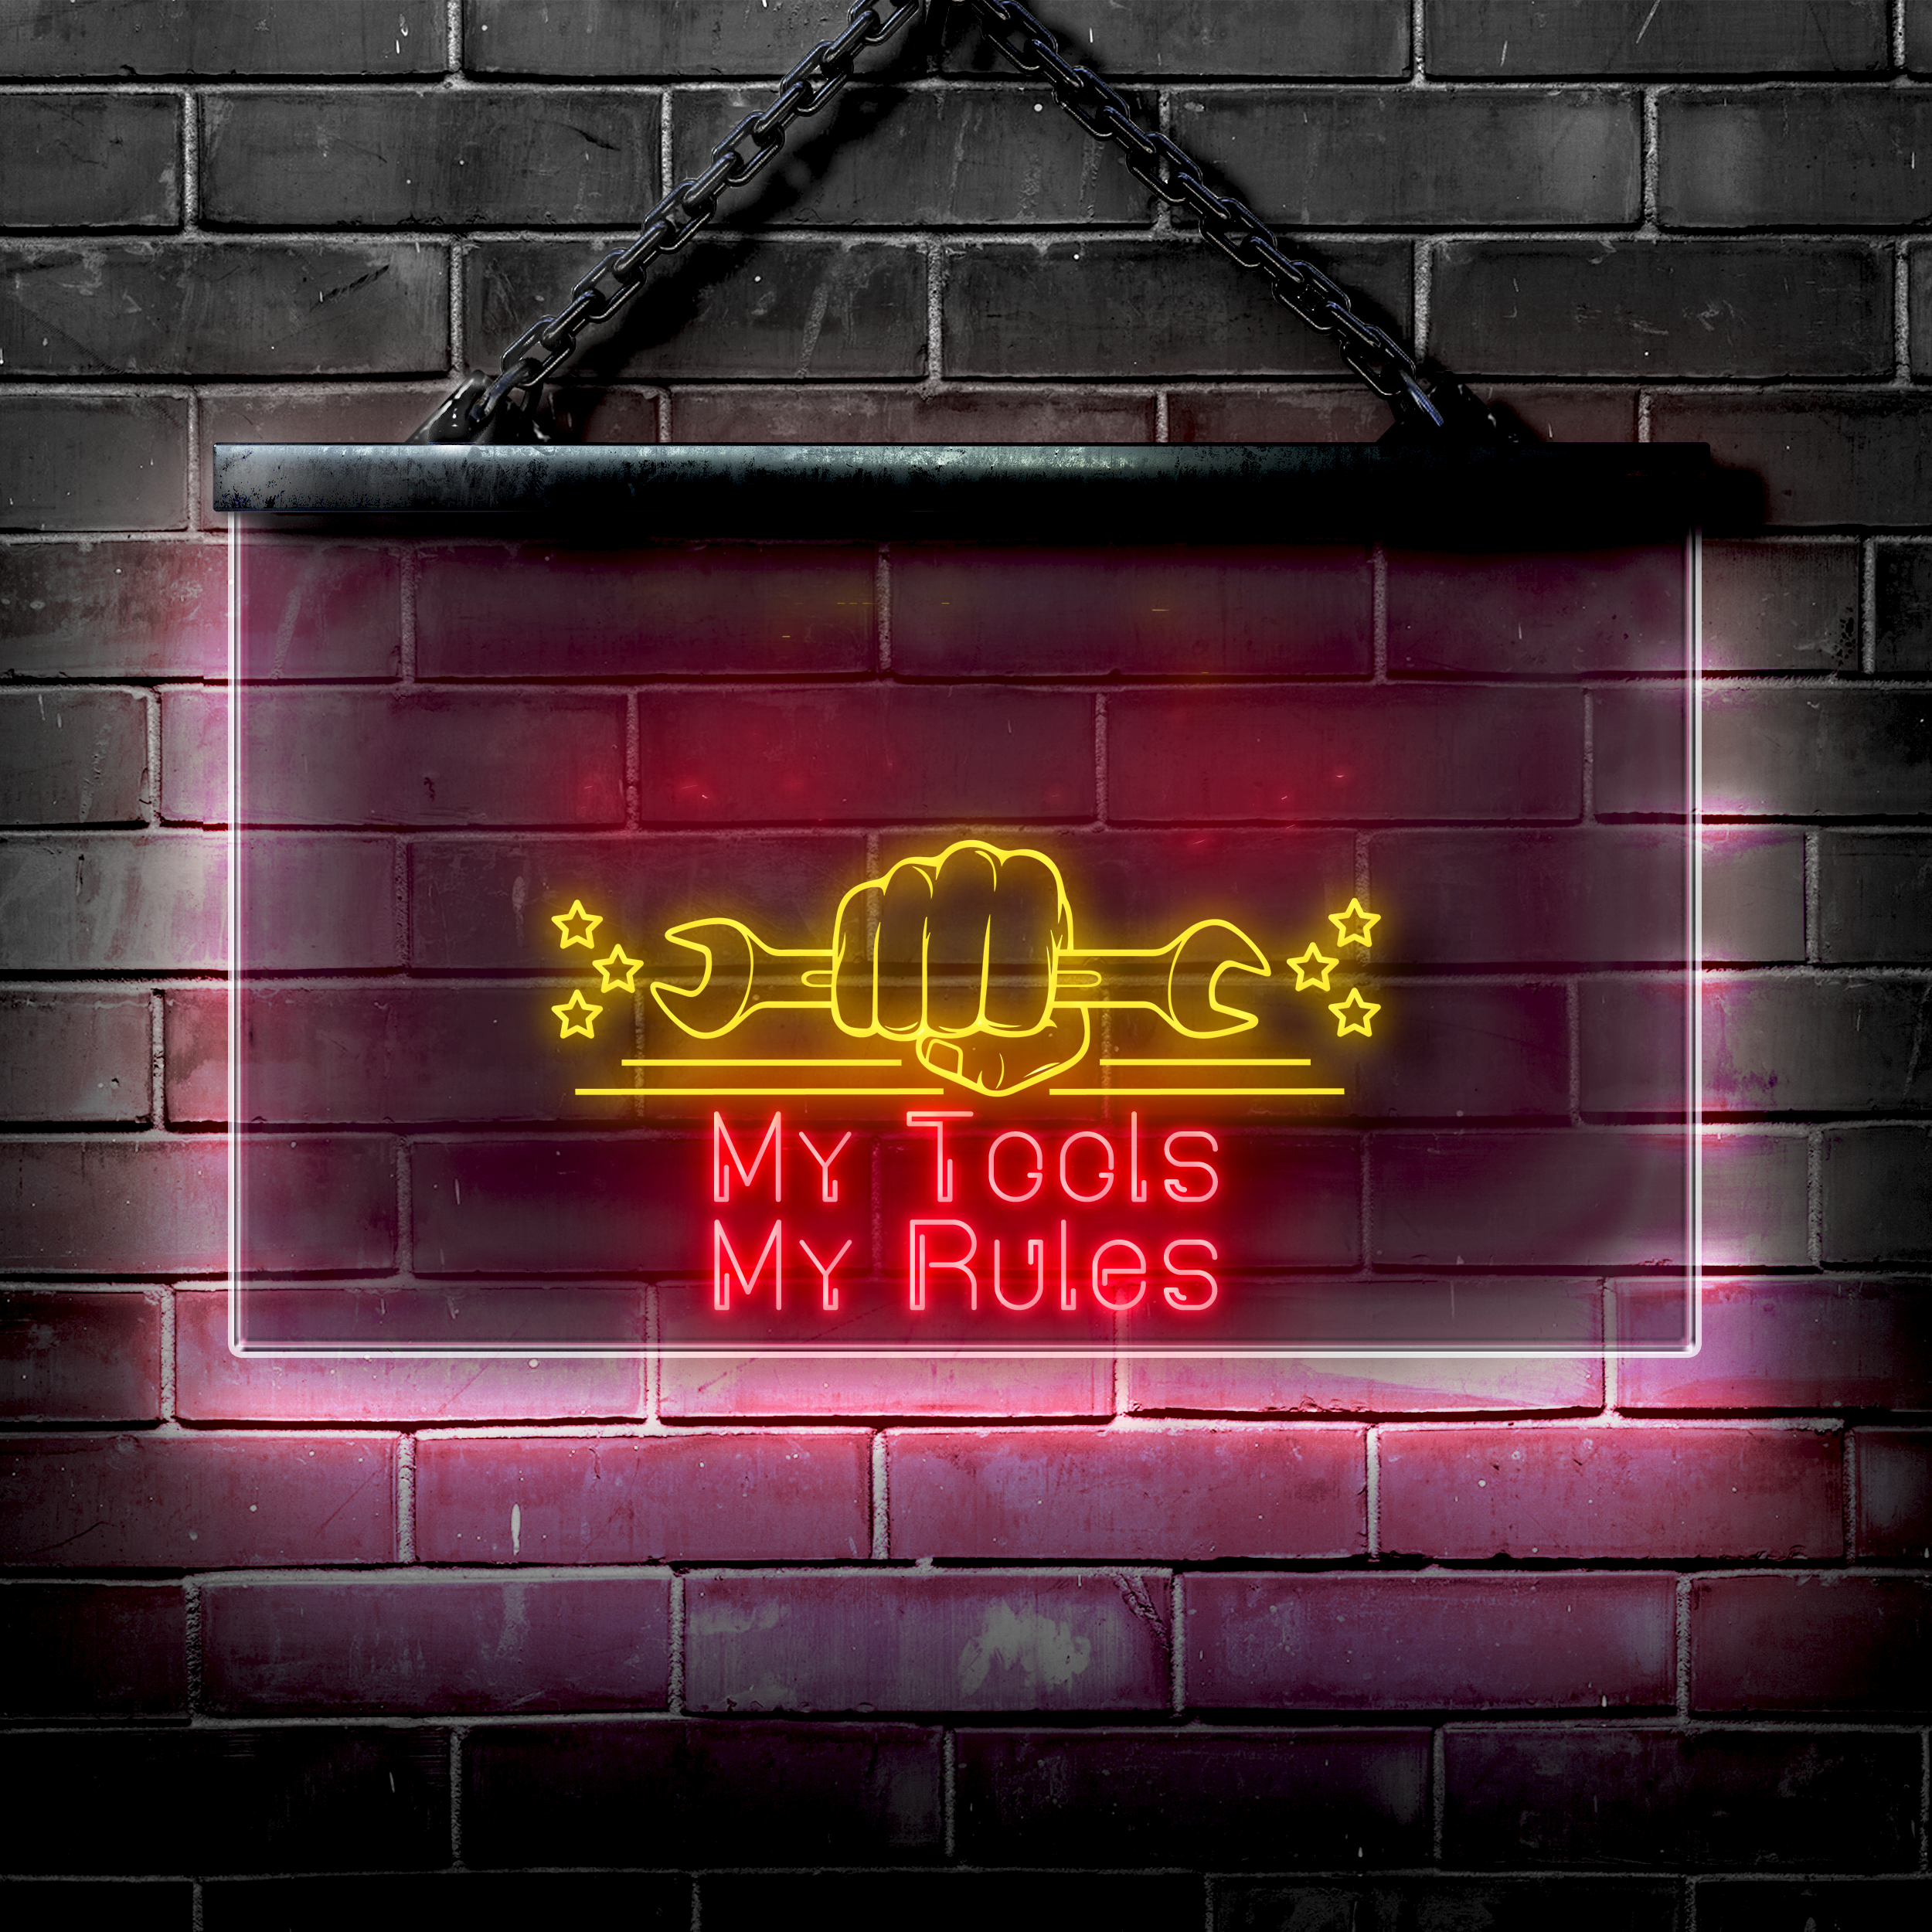 Personalized LED Garage Sign: My Tools My Rules - NeonFerry